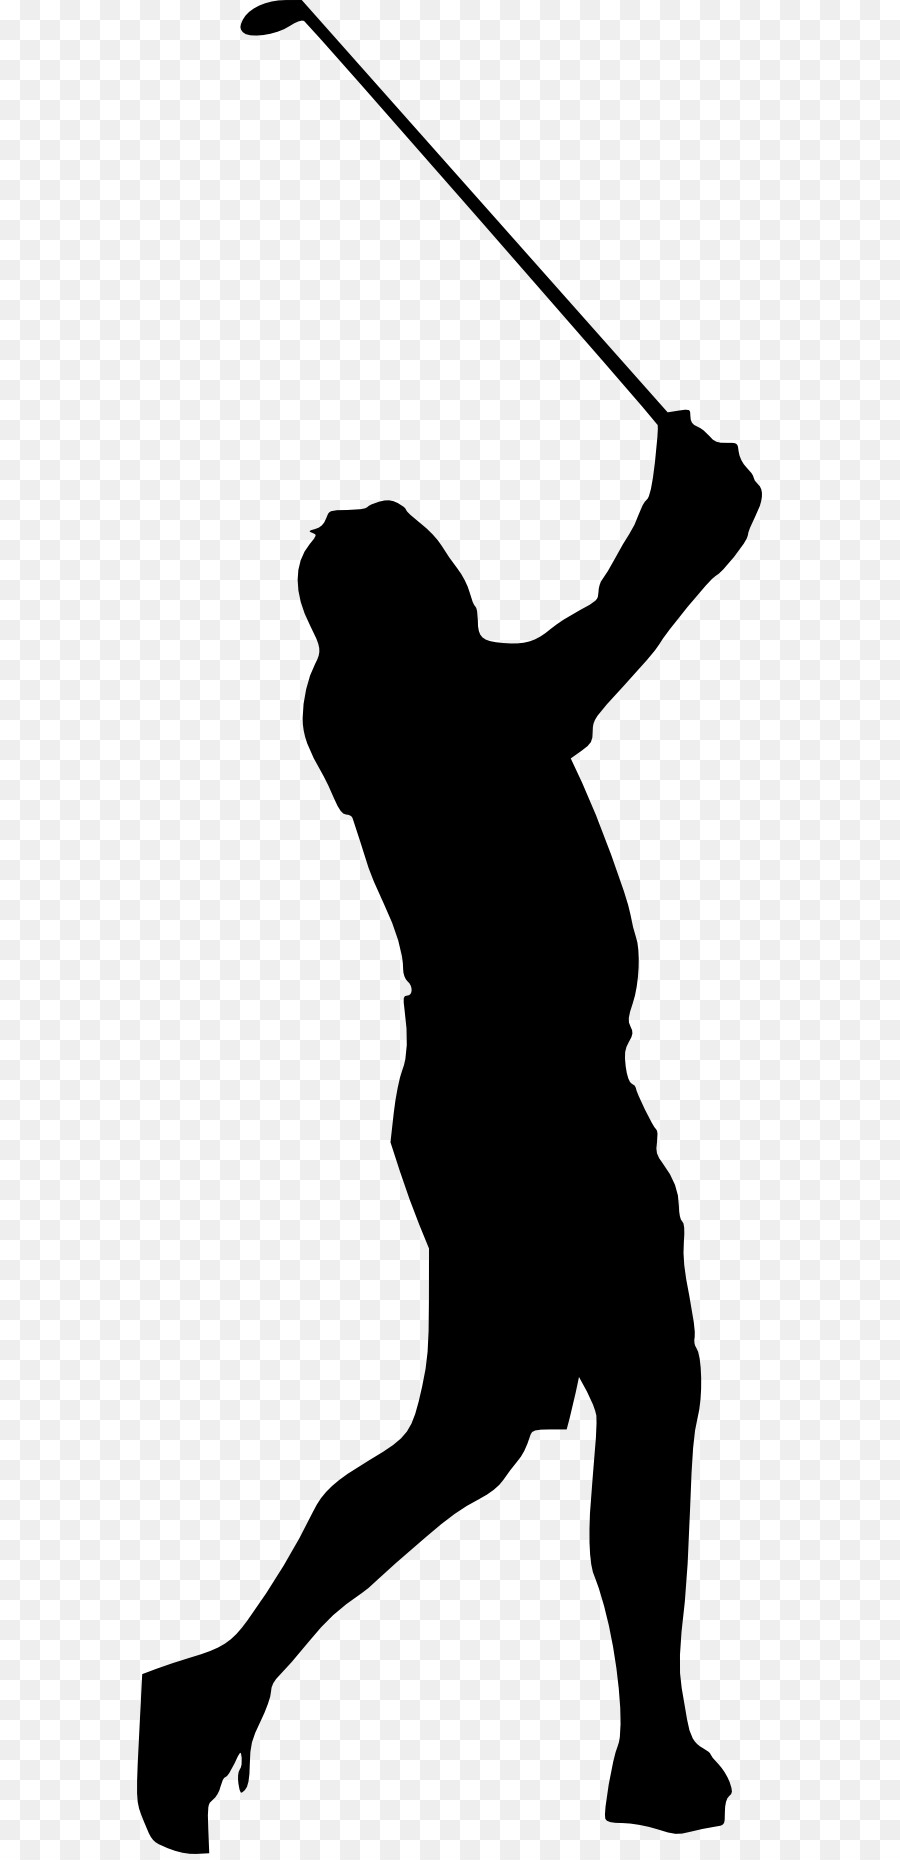 Silhouette Photography - Golfer png download - 625*1854 - Free Transparent Silhouette png Download.